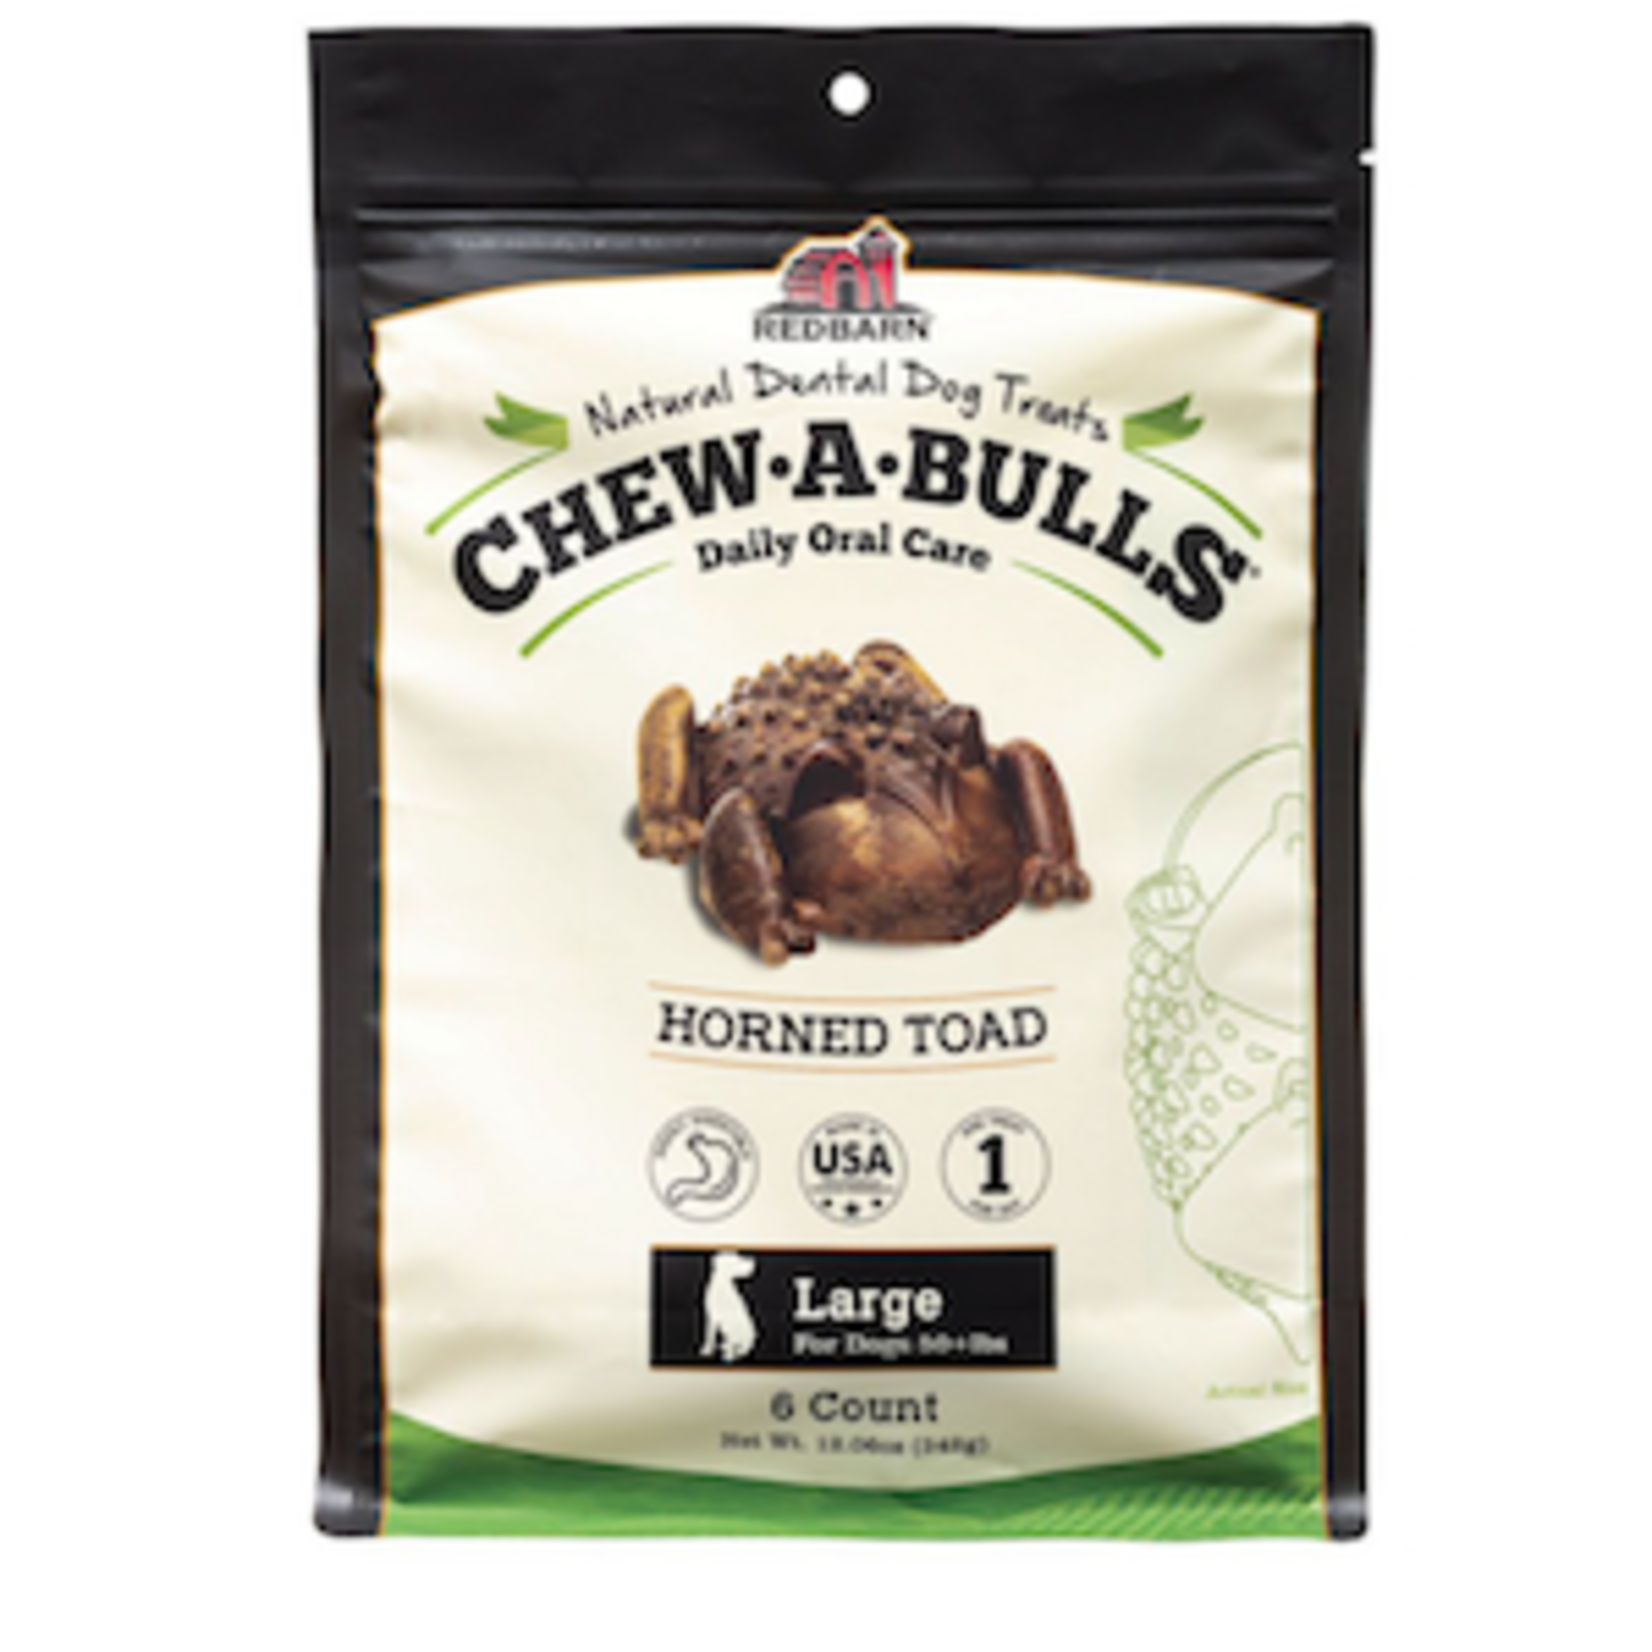 RED BARN (W) Red Barn Chew A Bulls Toad Large Dog 6 pack Bag